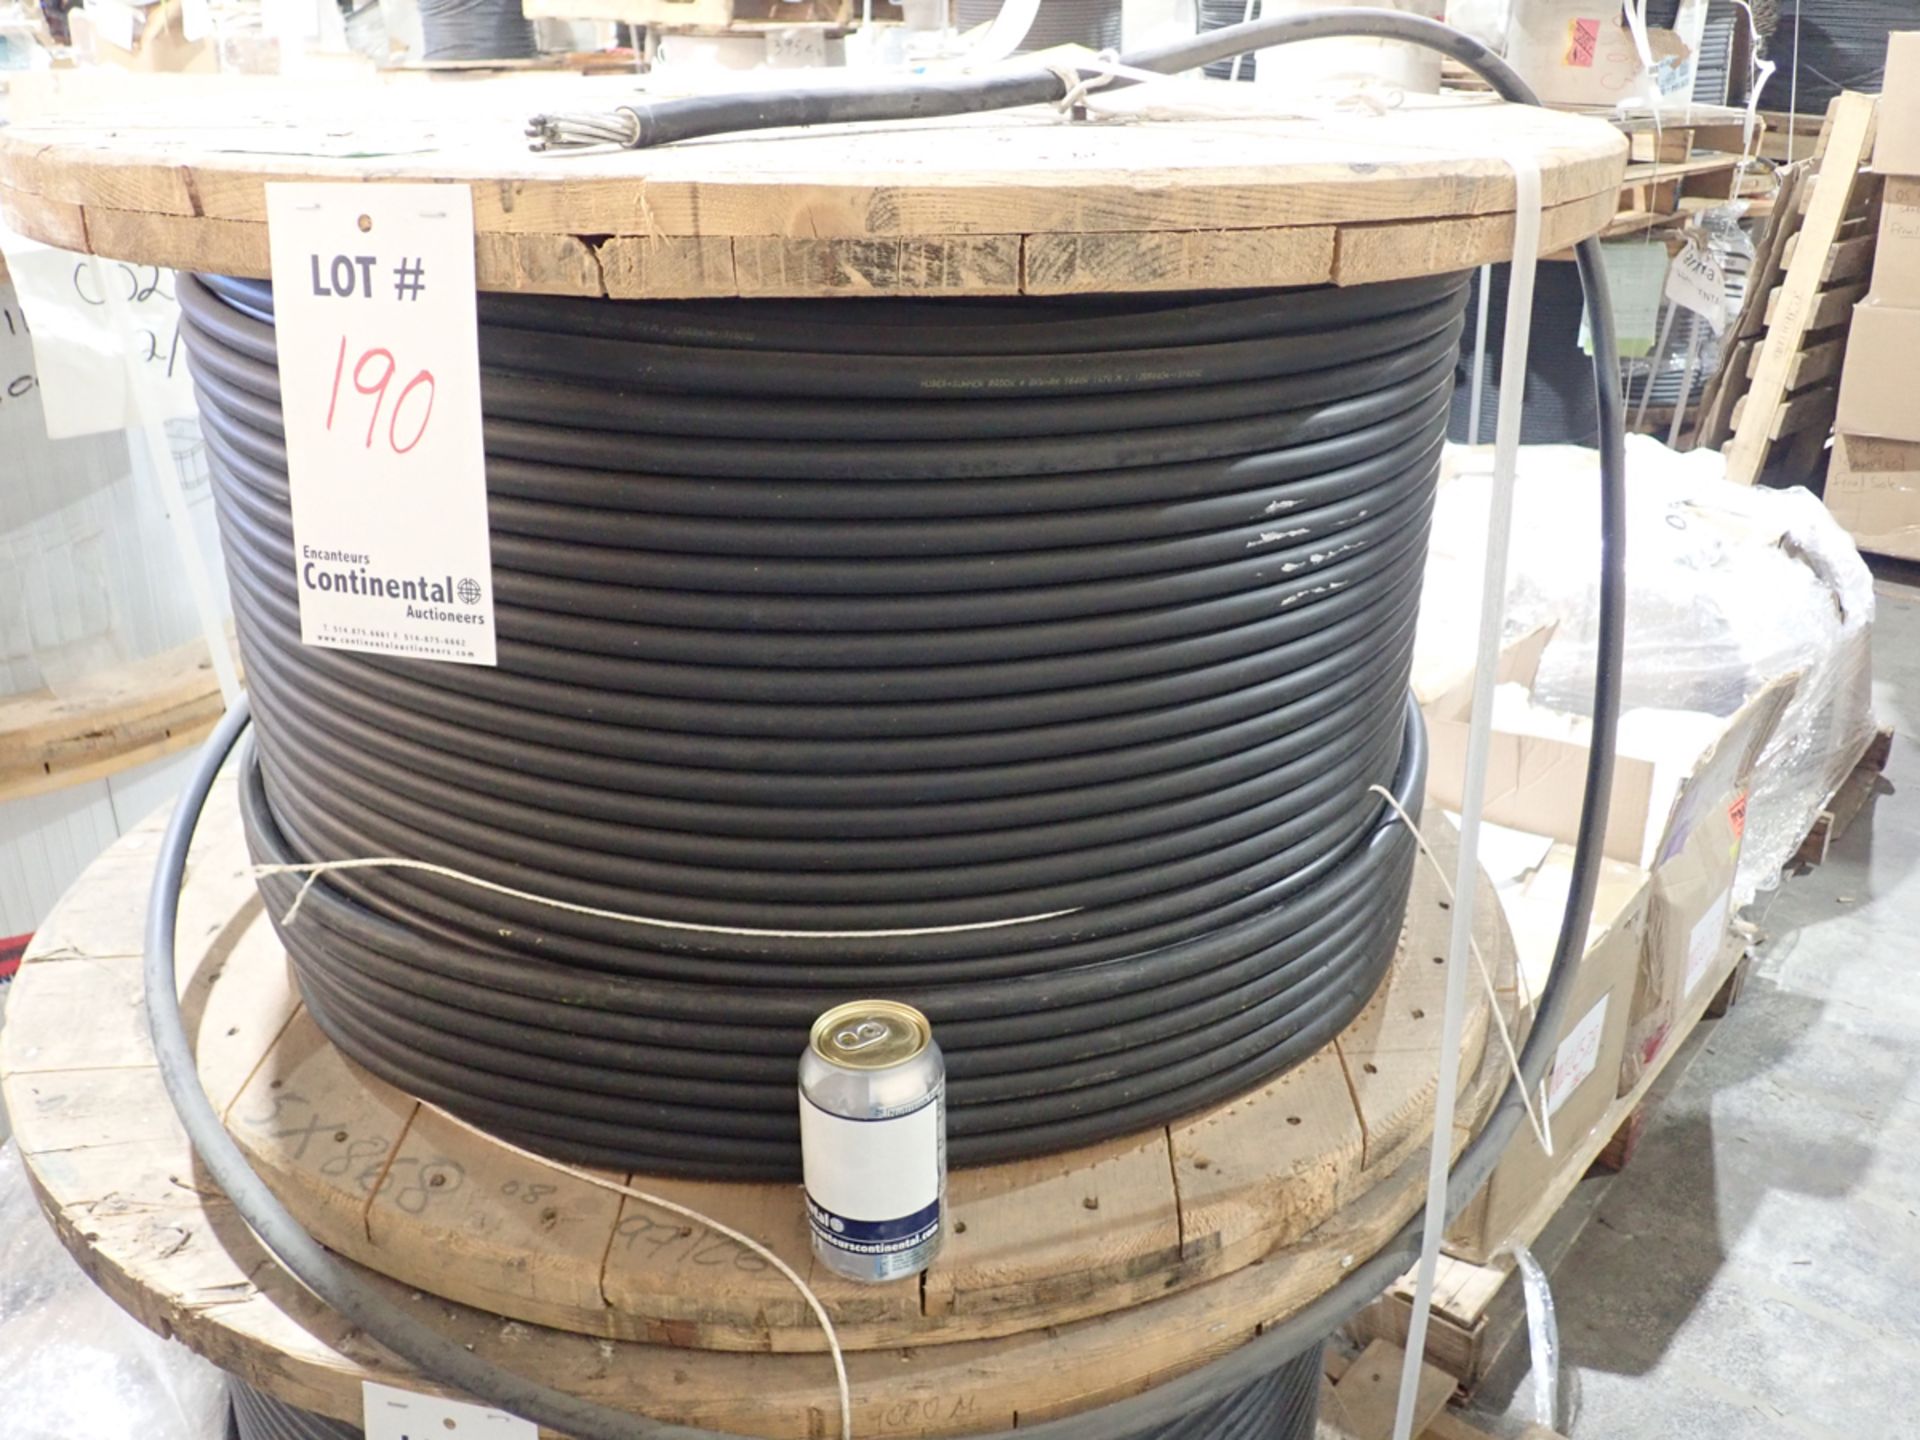 TIN PLATED COPPER CABLE APPROX. LENGTH: 495 METERS, APPROX. WEIGHT: 432 KG.